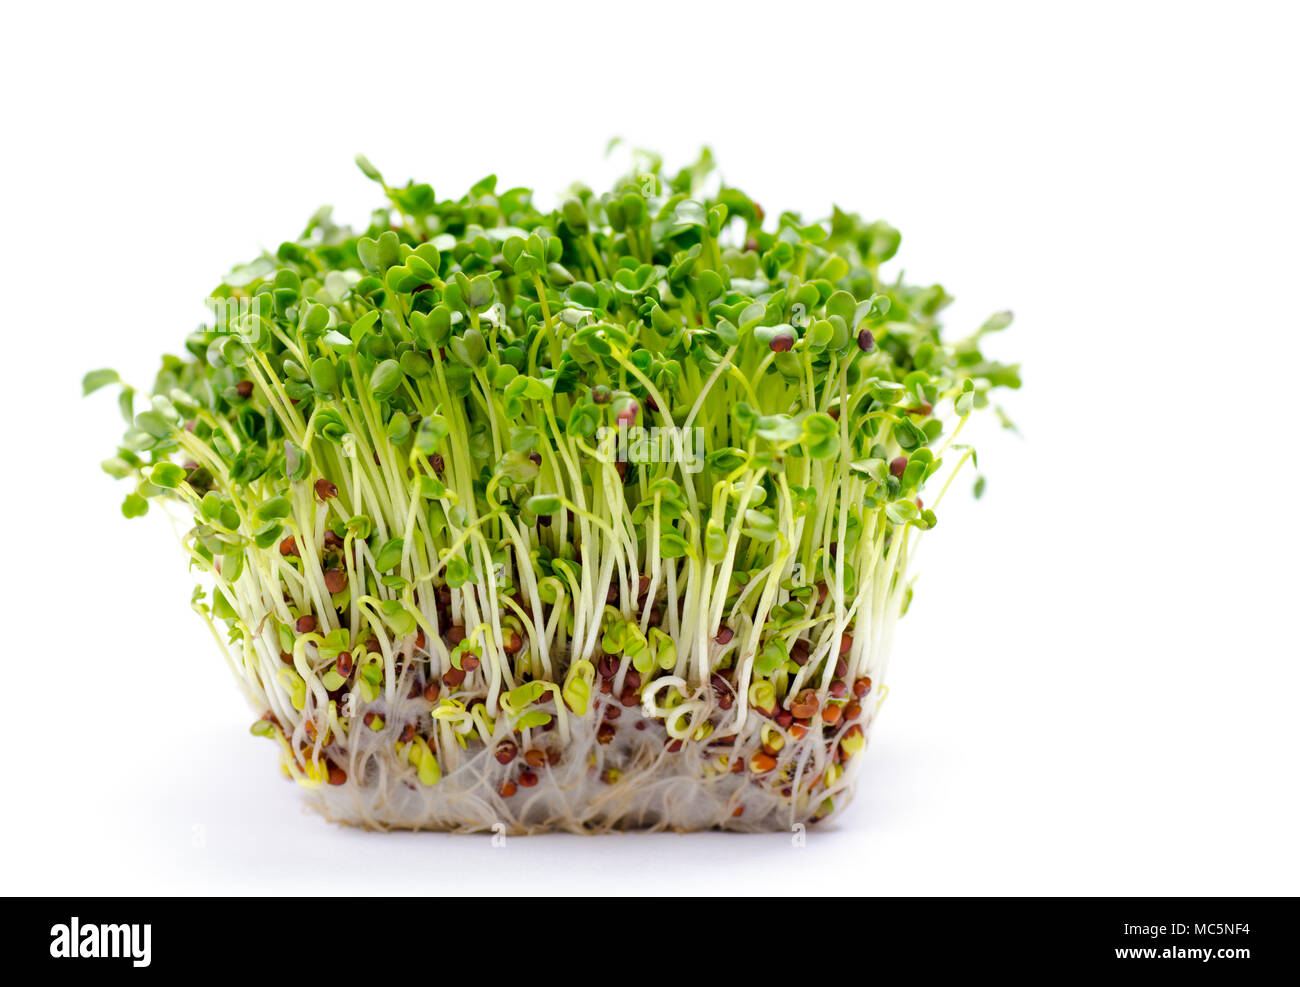 Alfalfa sprouts on white background. Raw sprouts, microgreens, healthy eating concept Stock Photo